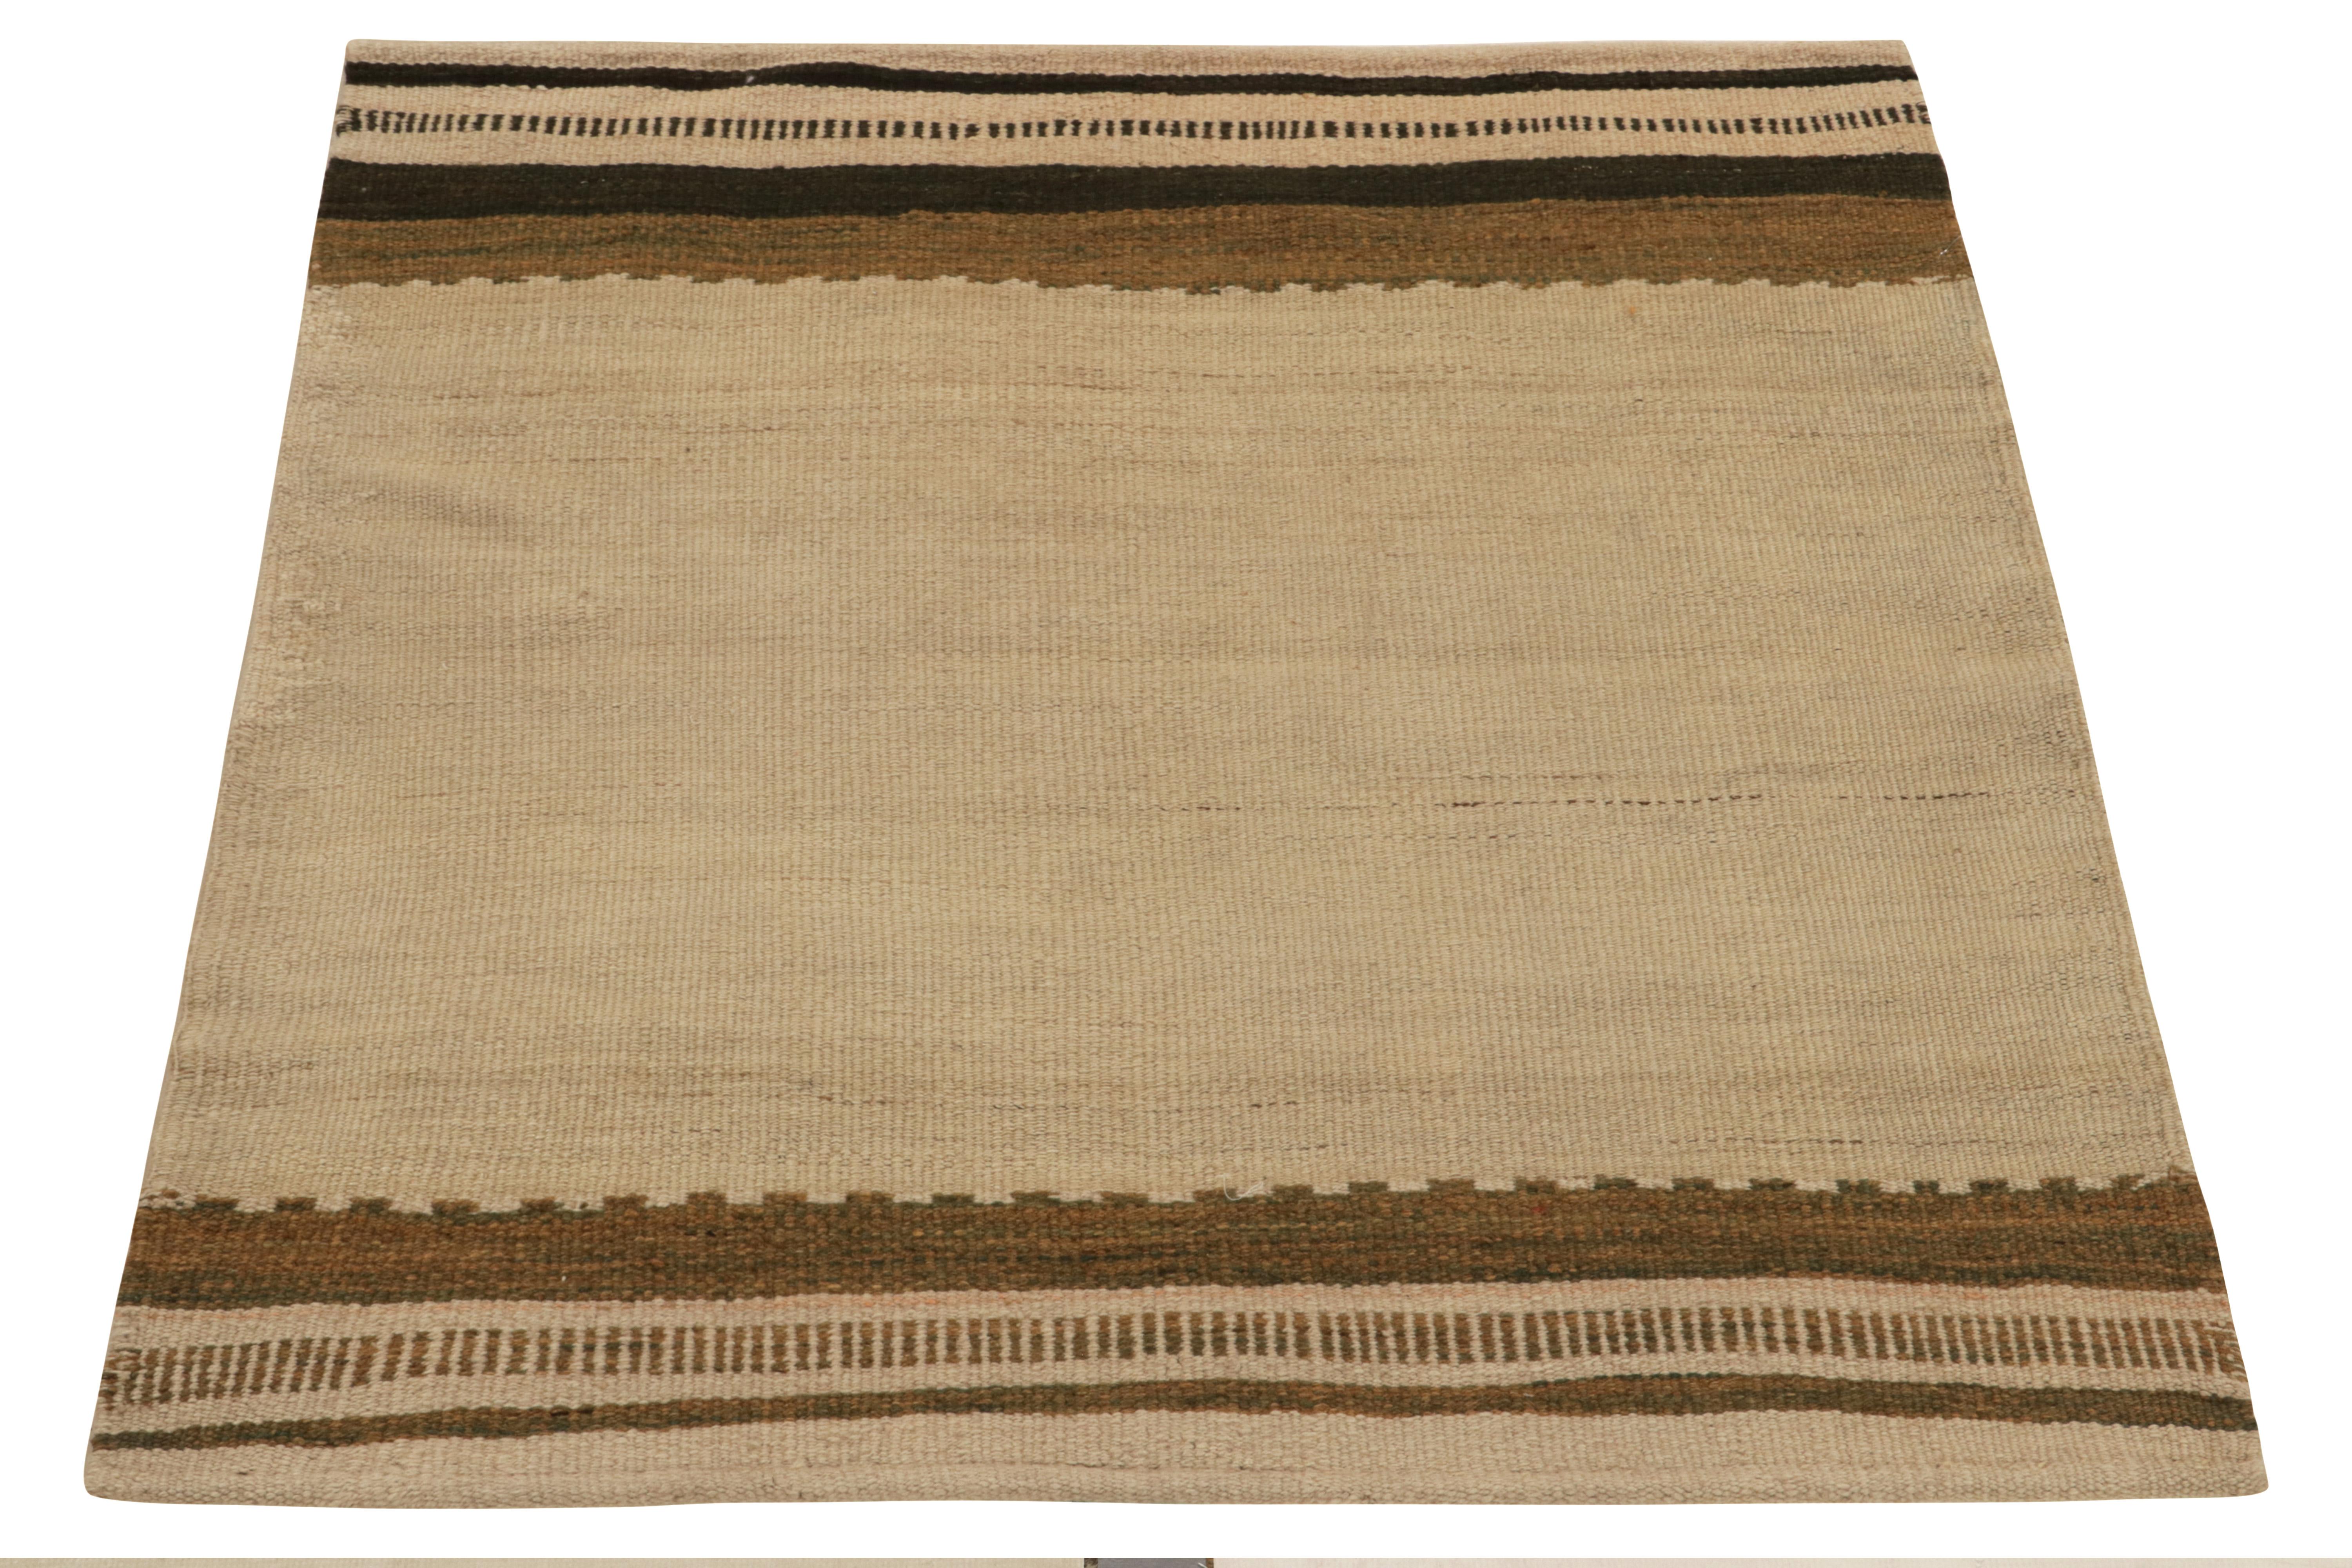 Originating circa 1980-1990, a tribal piece joining our prestigious collection of vintage flatweaves—a collectible Persian Sofreh curation among our latest. The 3x3 piece enjoys an open field with striped borders in a neutral beige-brown color way